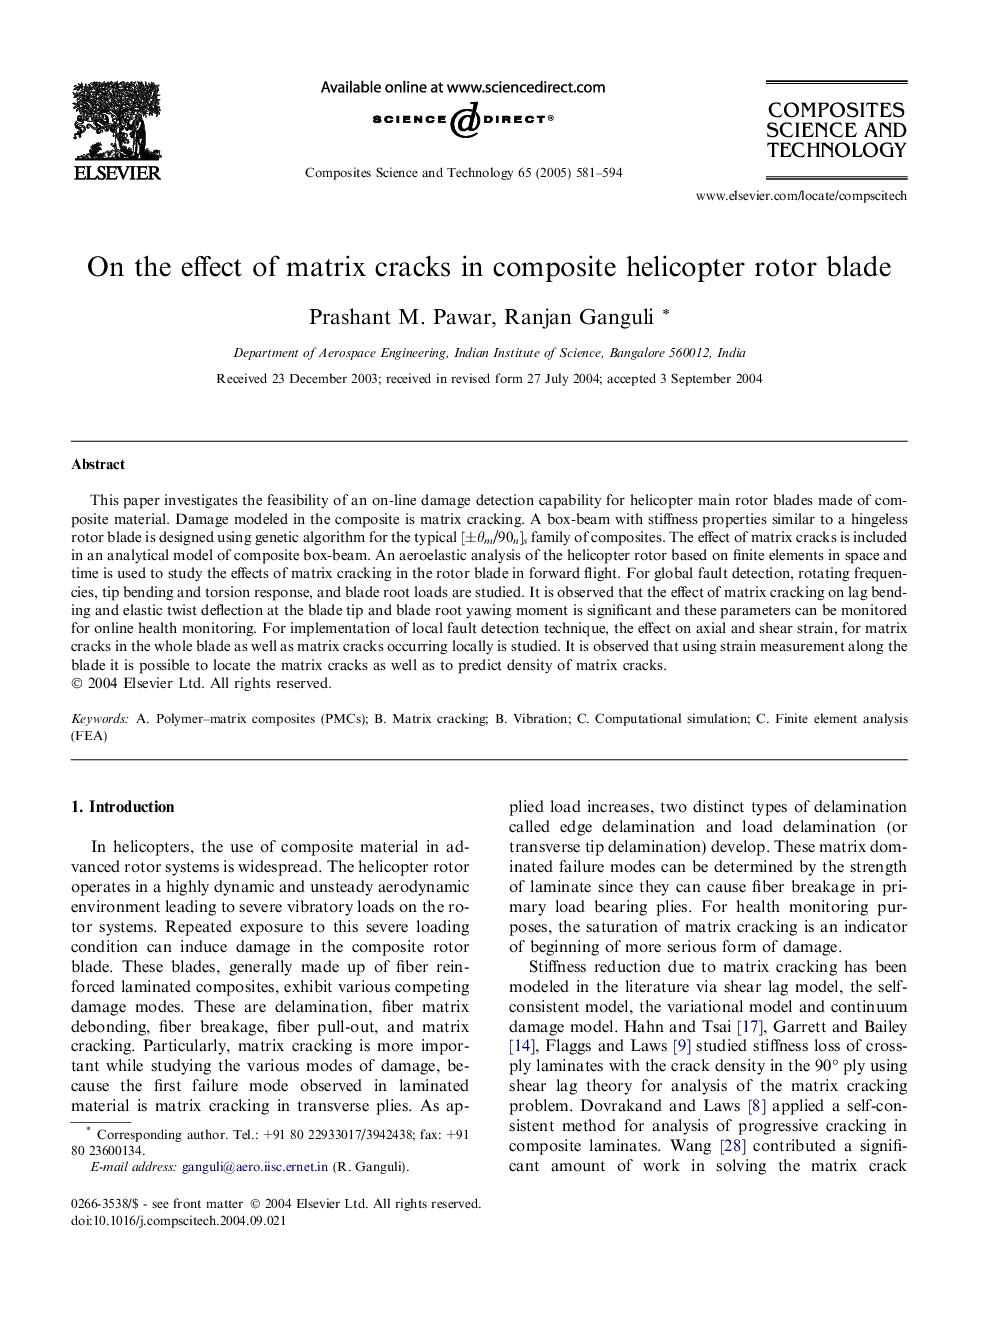 On the effect of matrix cracks in composite helicopter rotor blade